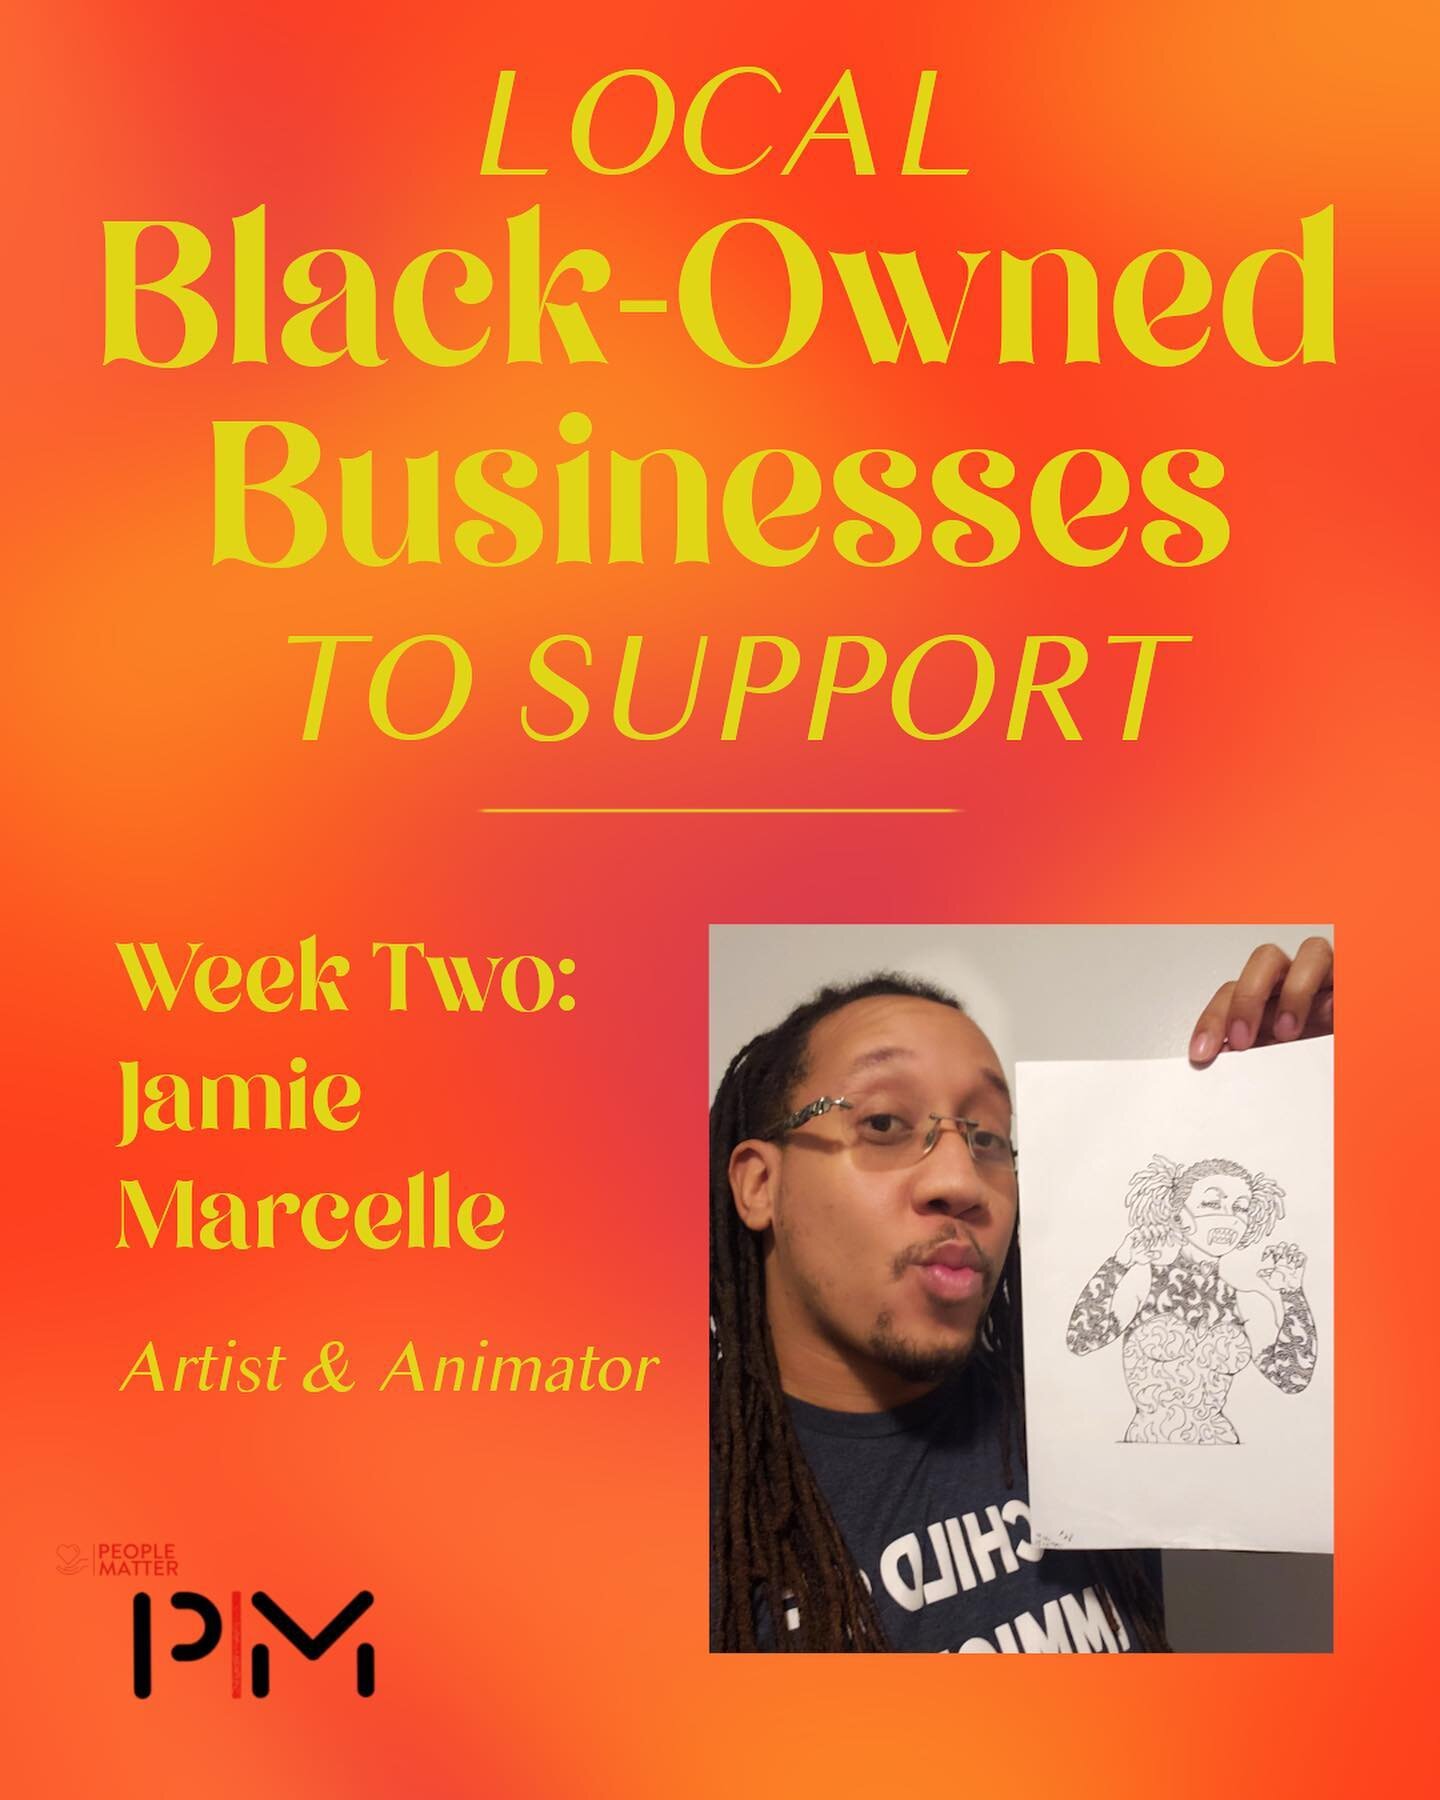 For this holiday season, we are shouting out small black-owned businesses committed to giving back to the black community! 

This week we are highlighting Jamie Marcelle, a Chicago artist and animator. Check out more of his art on Instagram at @jamie